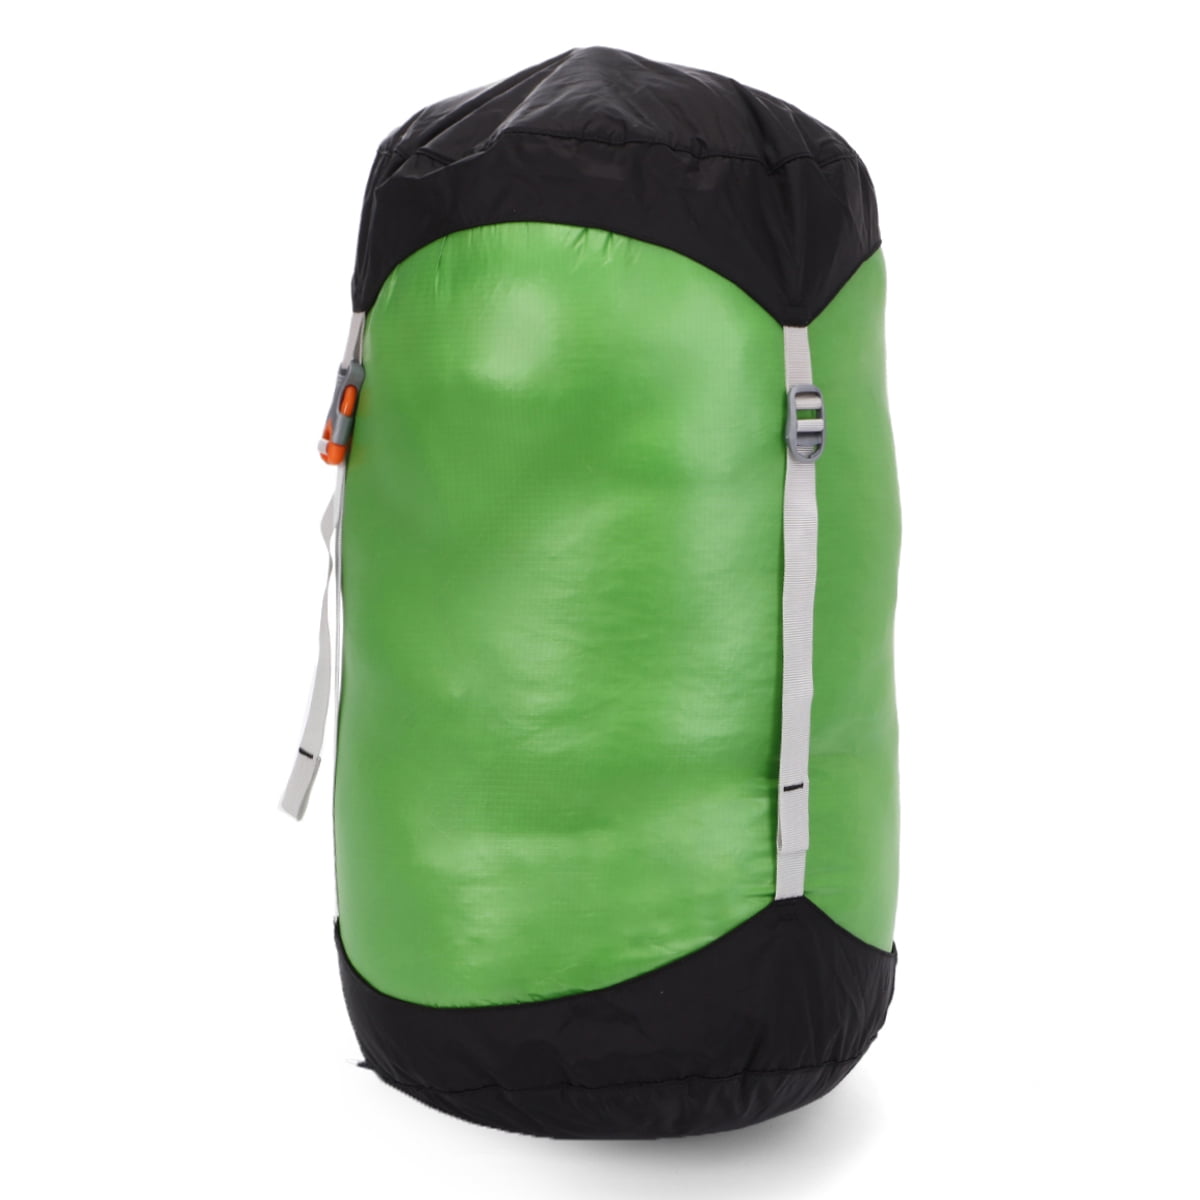 Details about   Portable Camping Sleeping Bag Waterproof Camouflage Outdoor Emergency Hiking Bag 